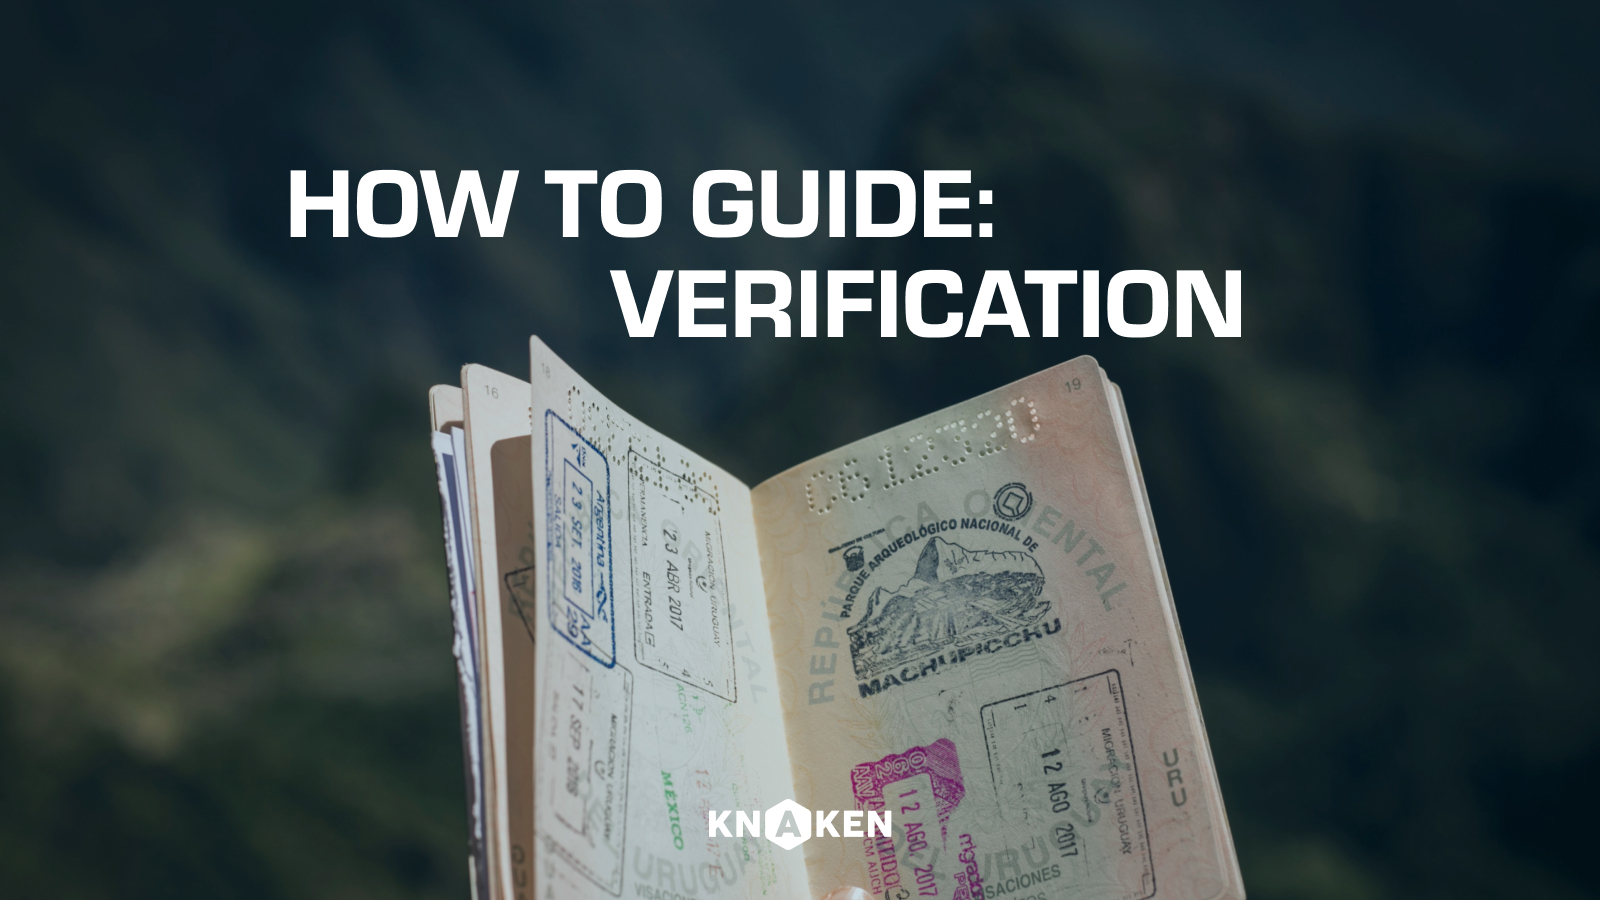 How to guide: Verification